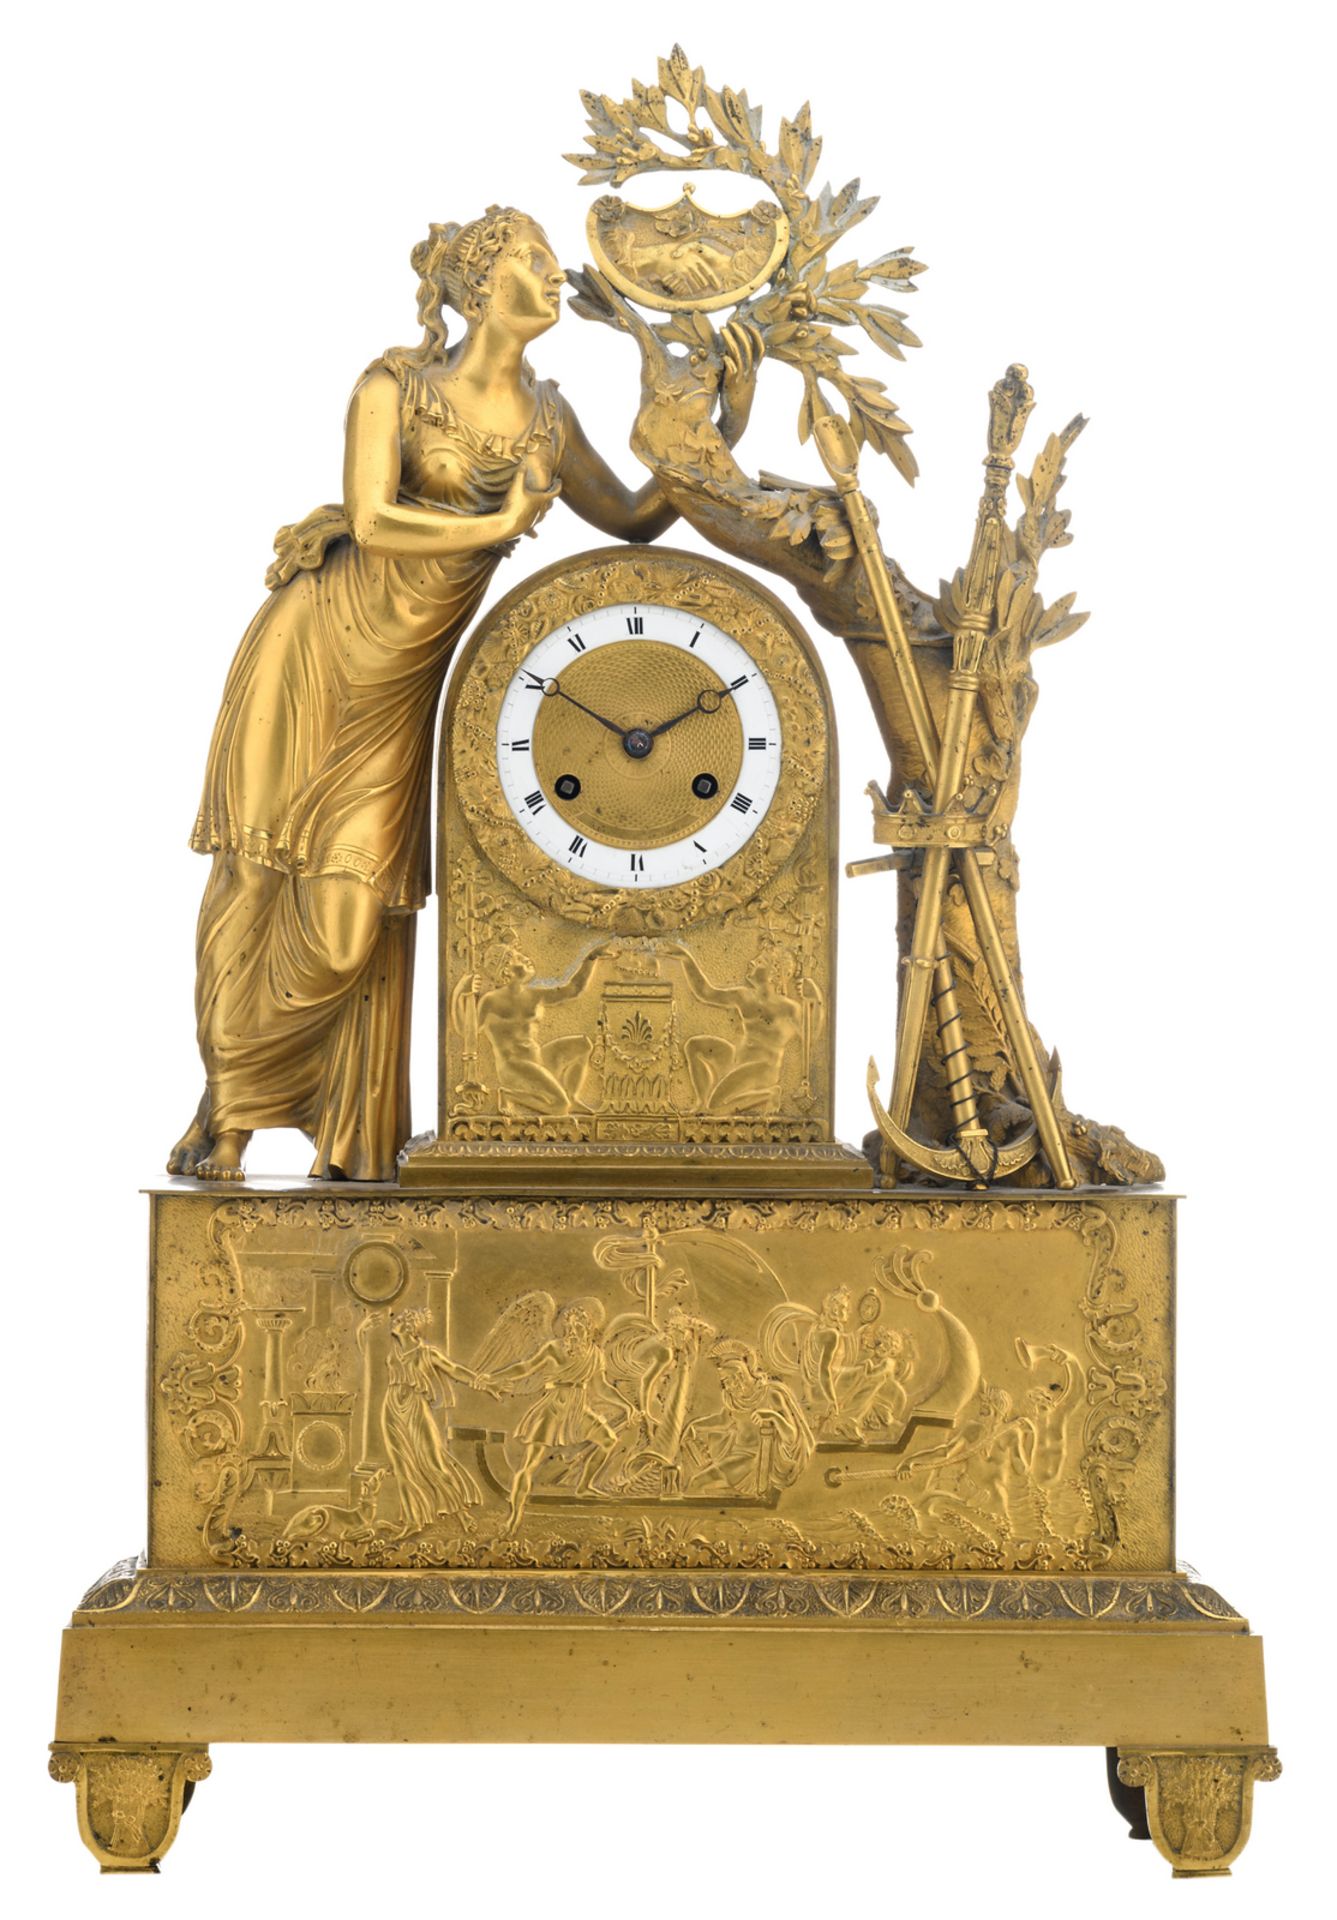 A mid 19thC gilt bronze mantle clock depicting Helen of Troy, traces of a mark on the dial, H 59,5